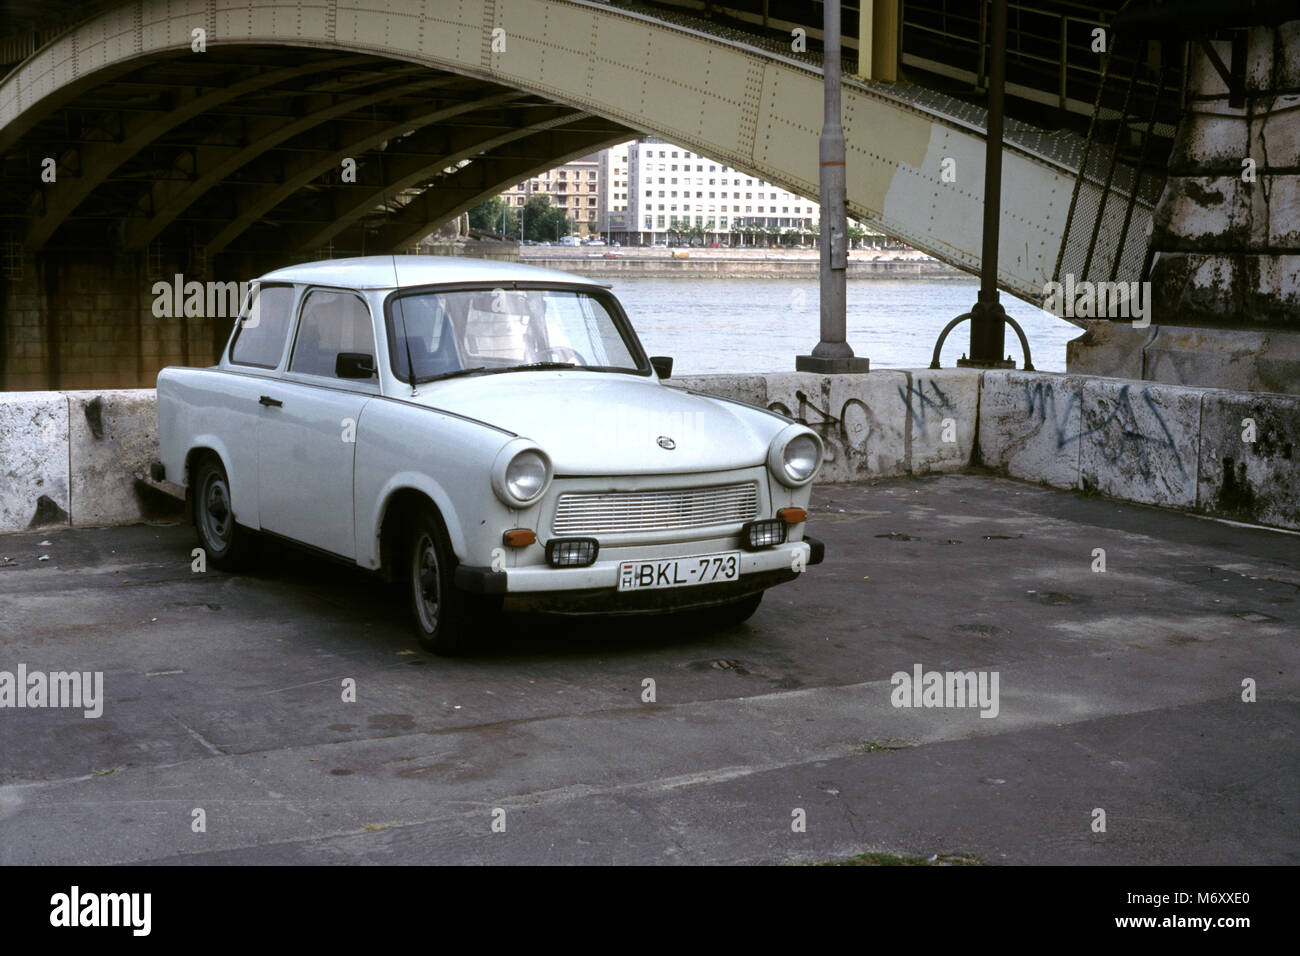 A Trabant saloon car in Budapest, Hungary. By the River Danube. Stock Photo